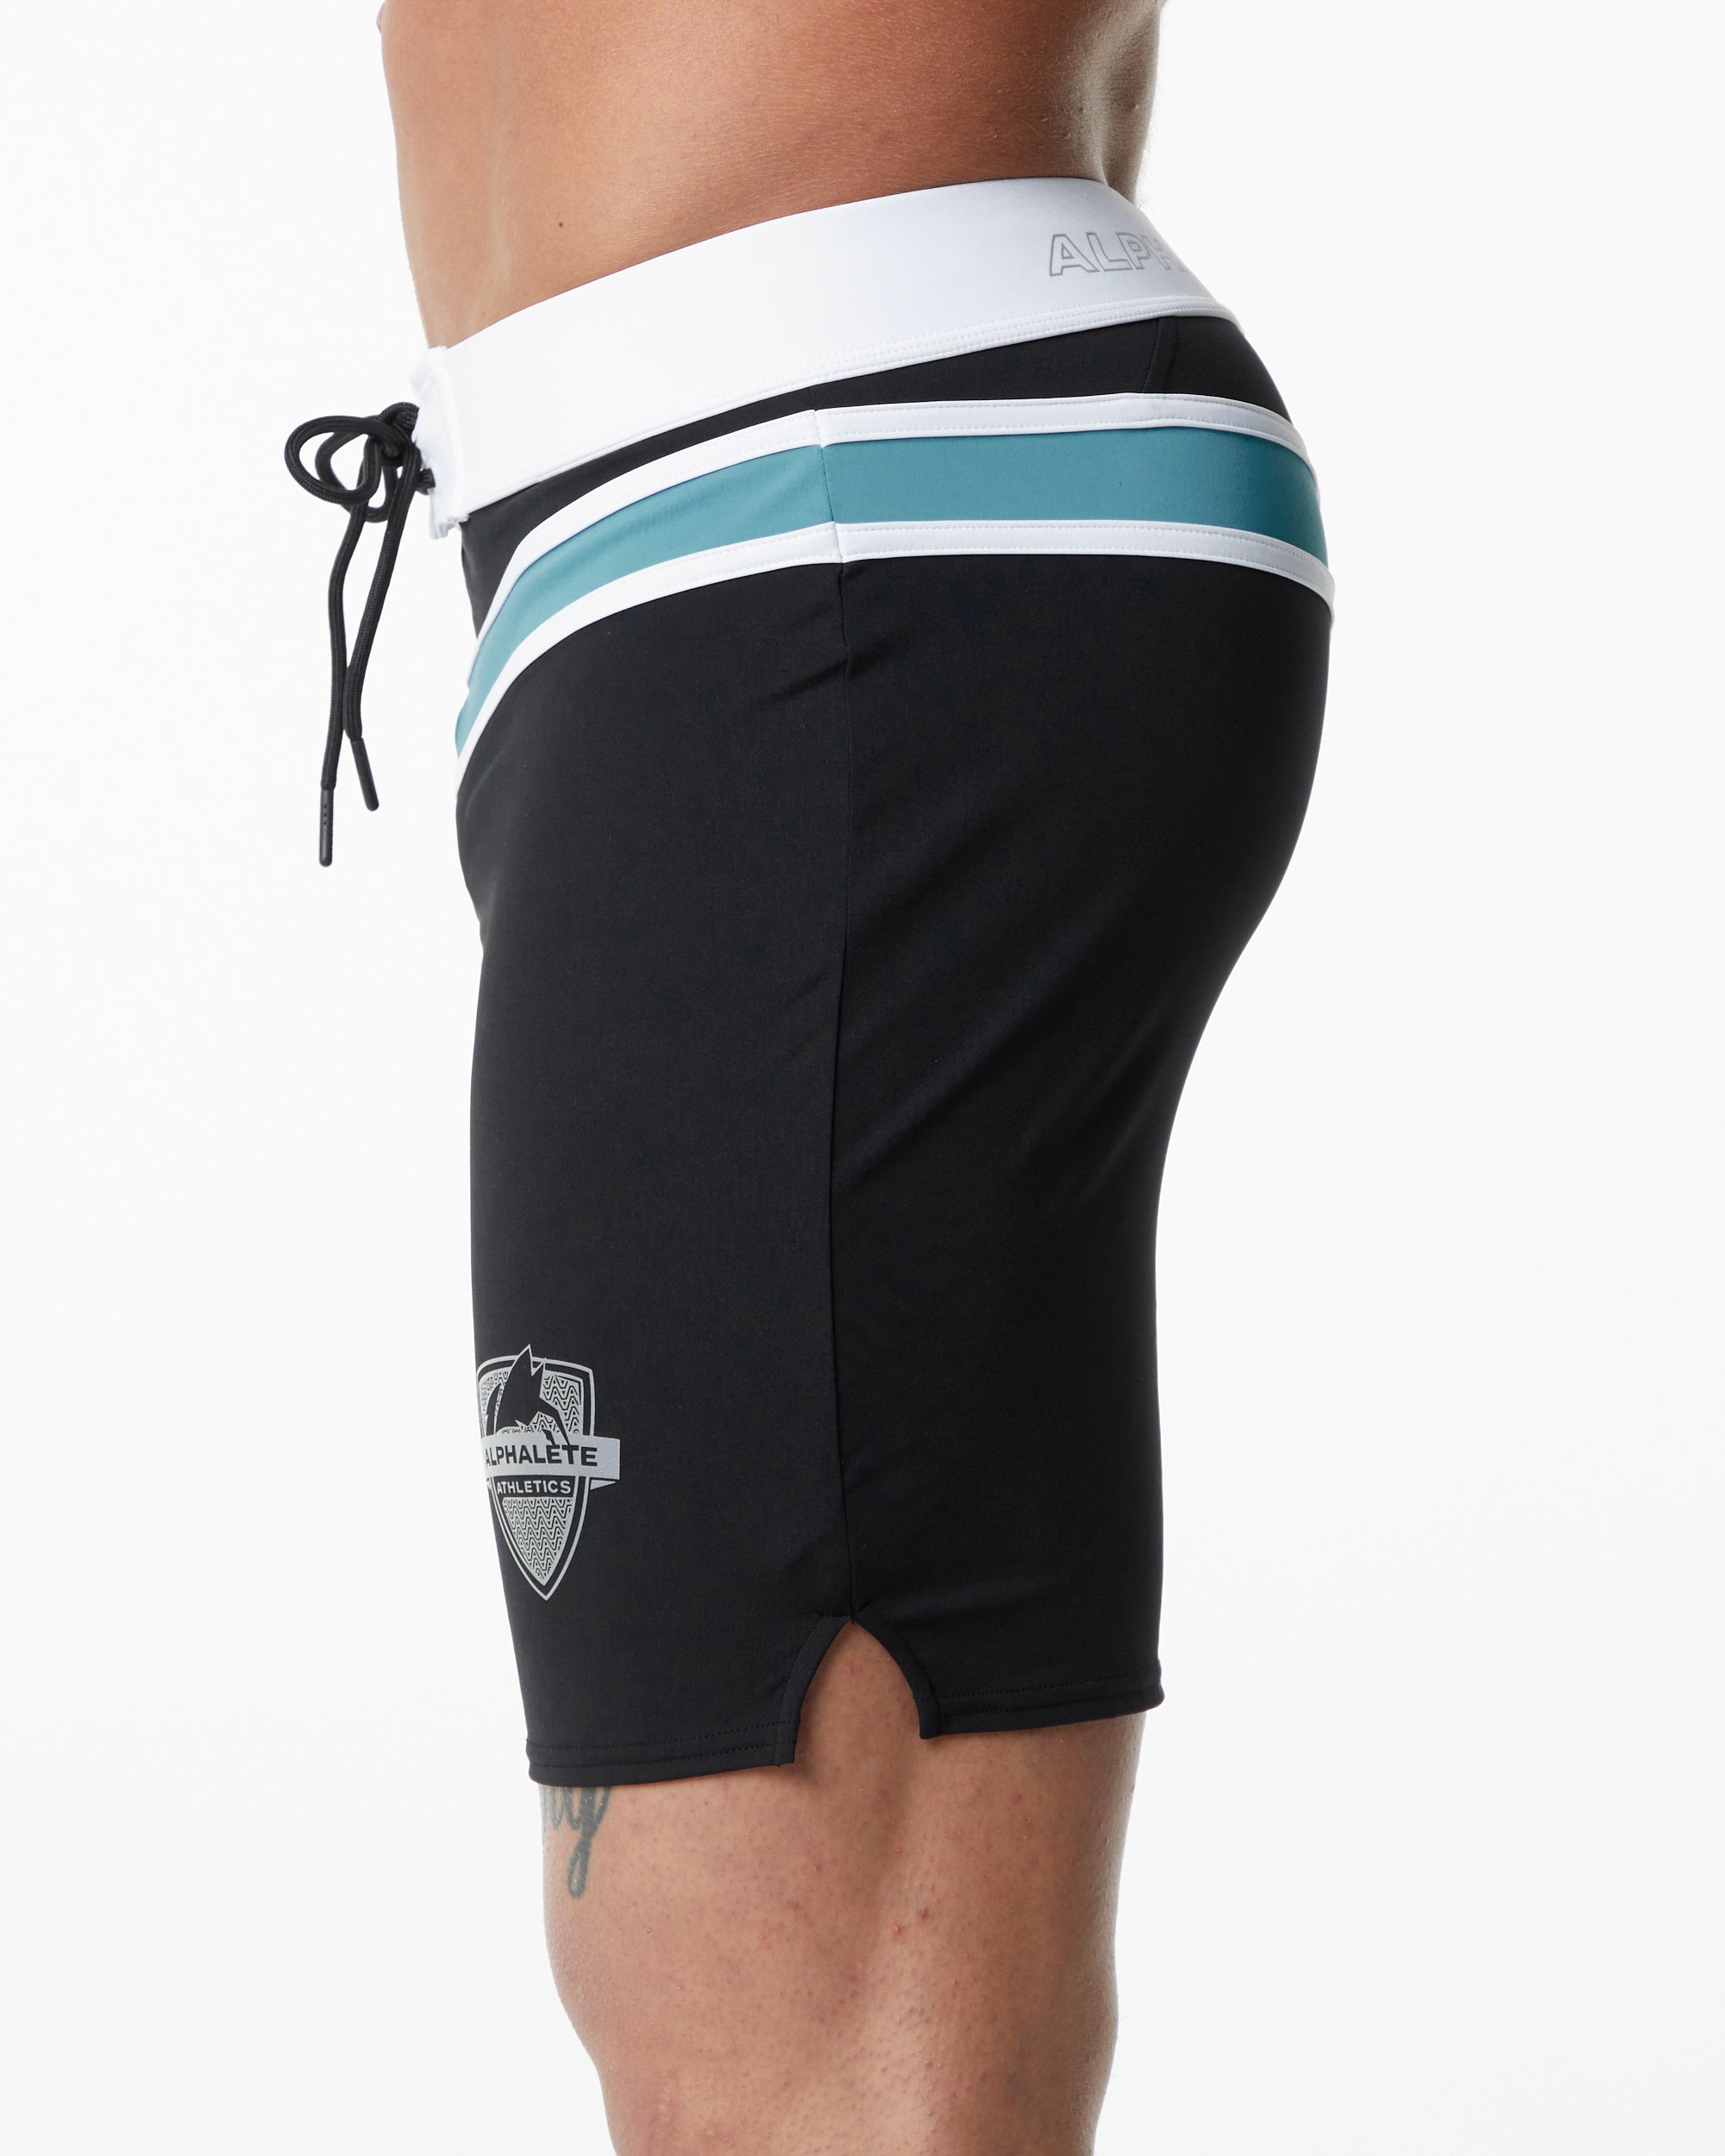 Trident Competition Short - Black